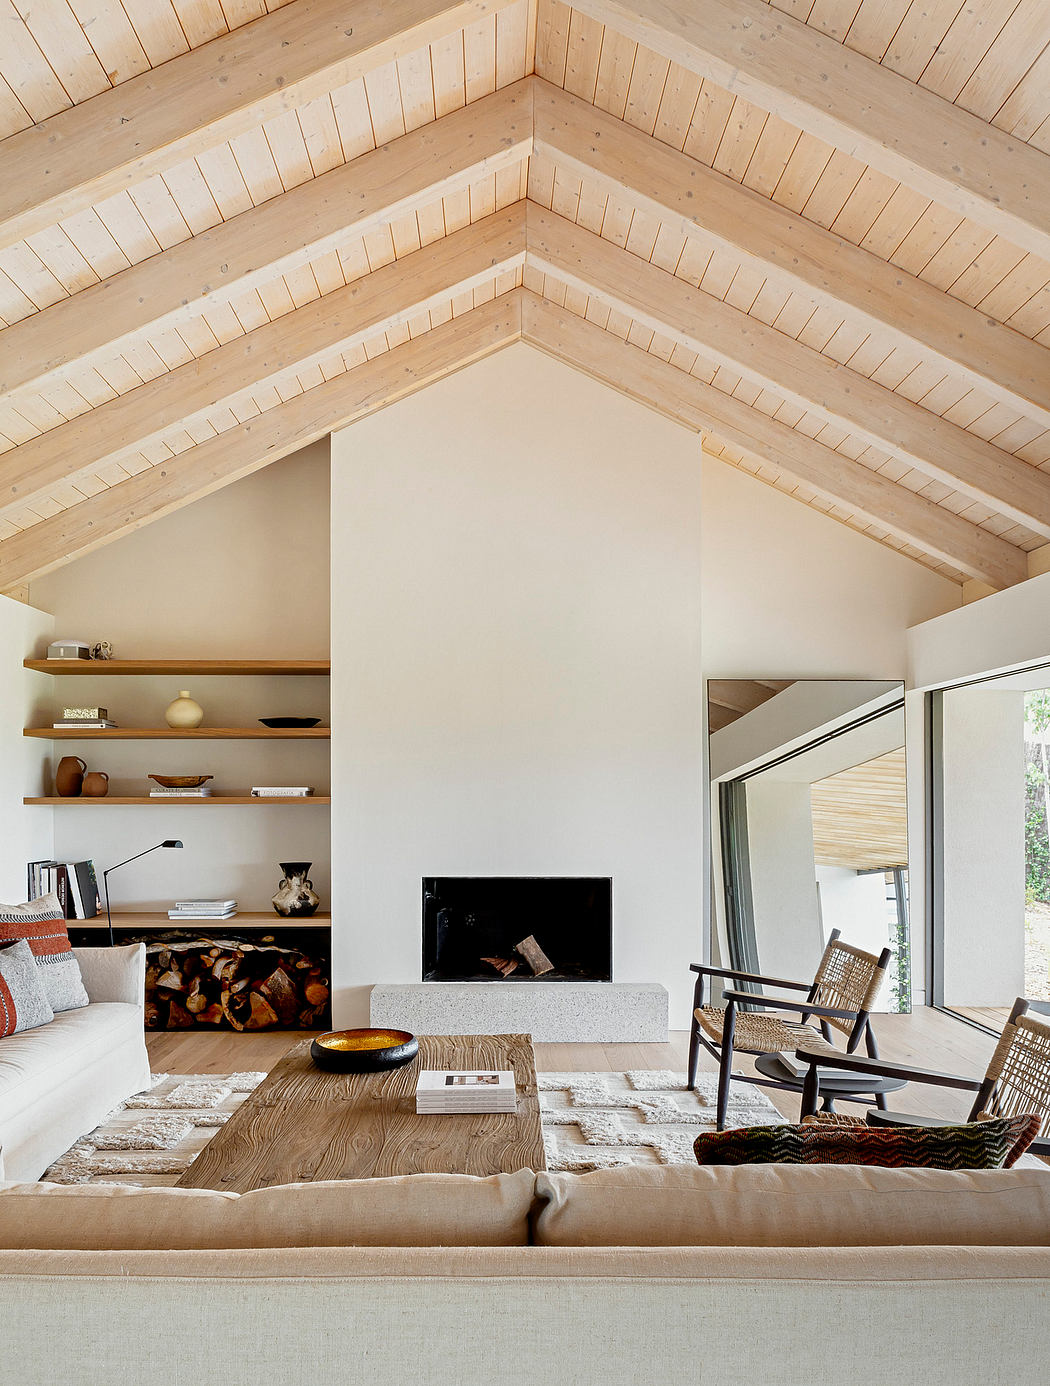 Contemporary living room with A-frame ceiling, fireplace, and wooden accents.